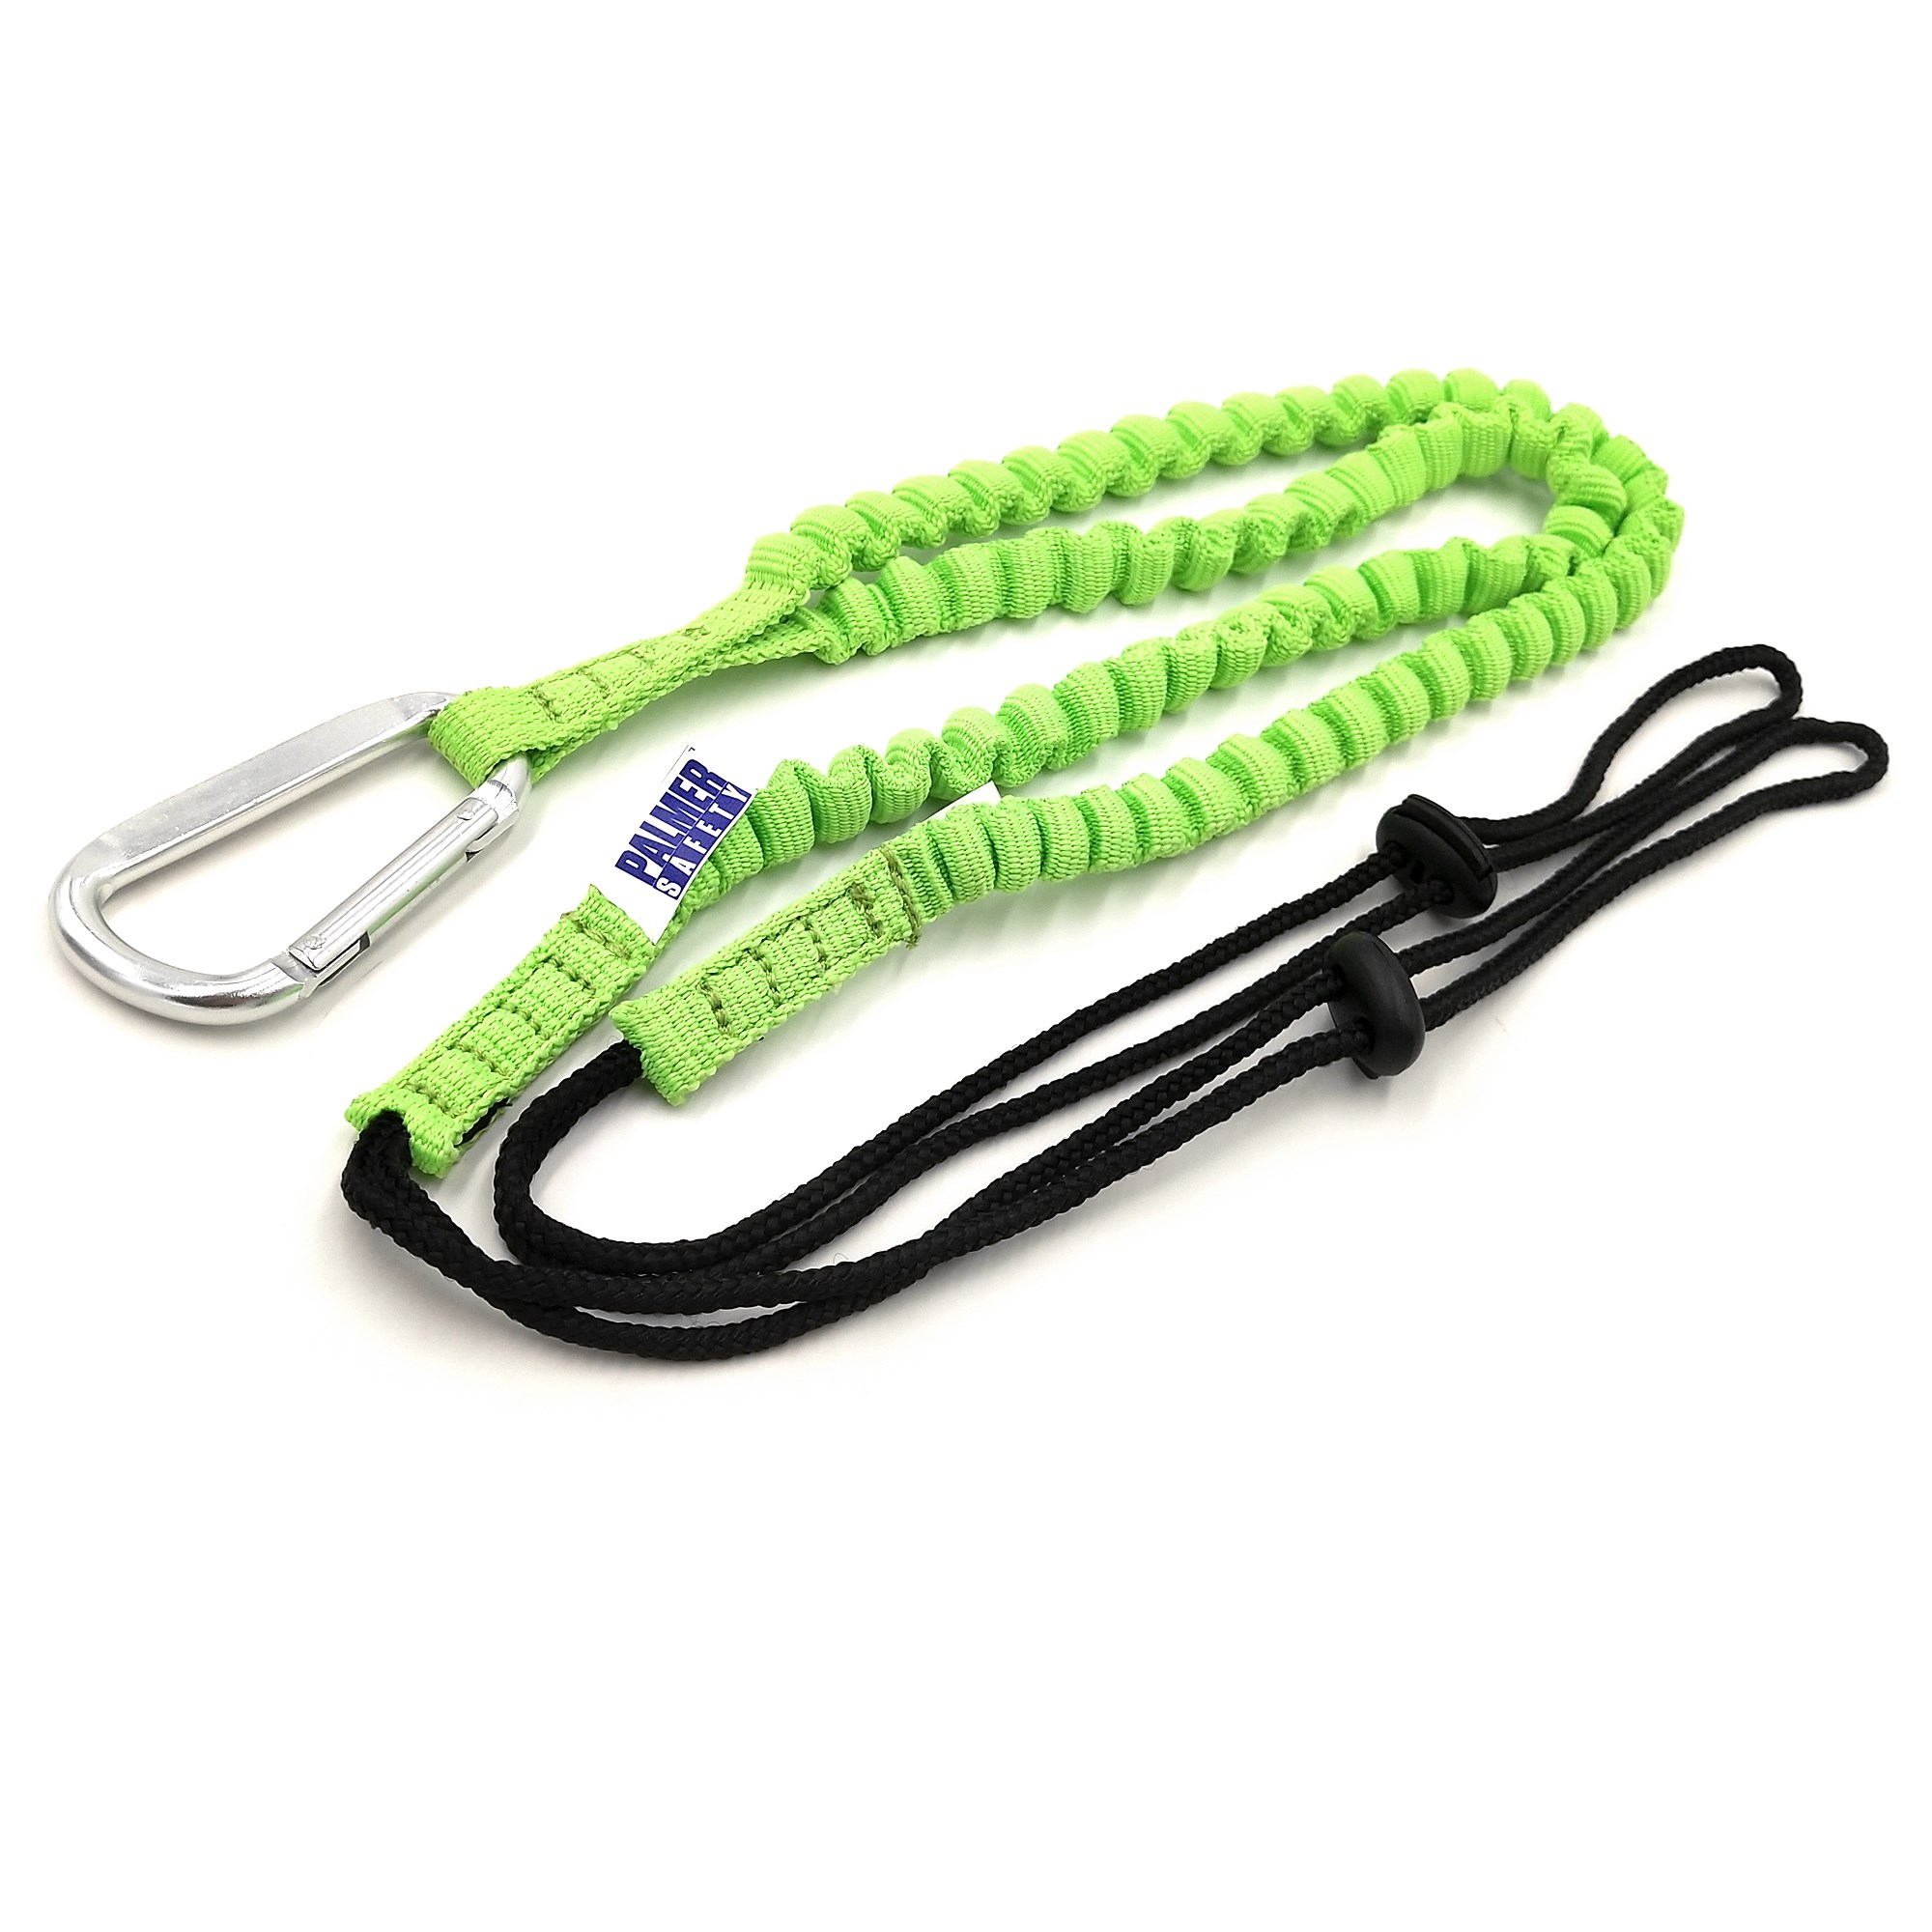 Hot New Products Tool Lanyards With Hooks - 2020 New Coming Hot Sale Best Quality Retractable Tool Lanyard with Carabiner – Bison